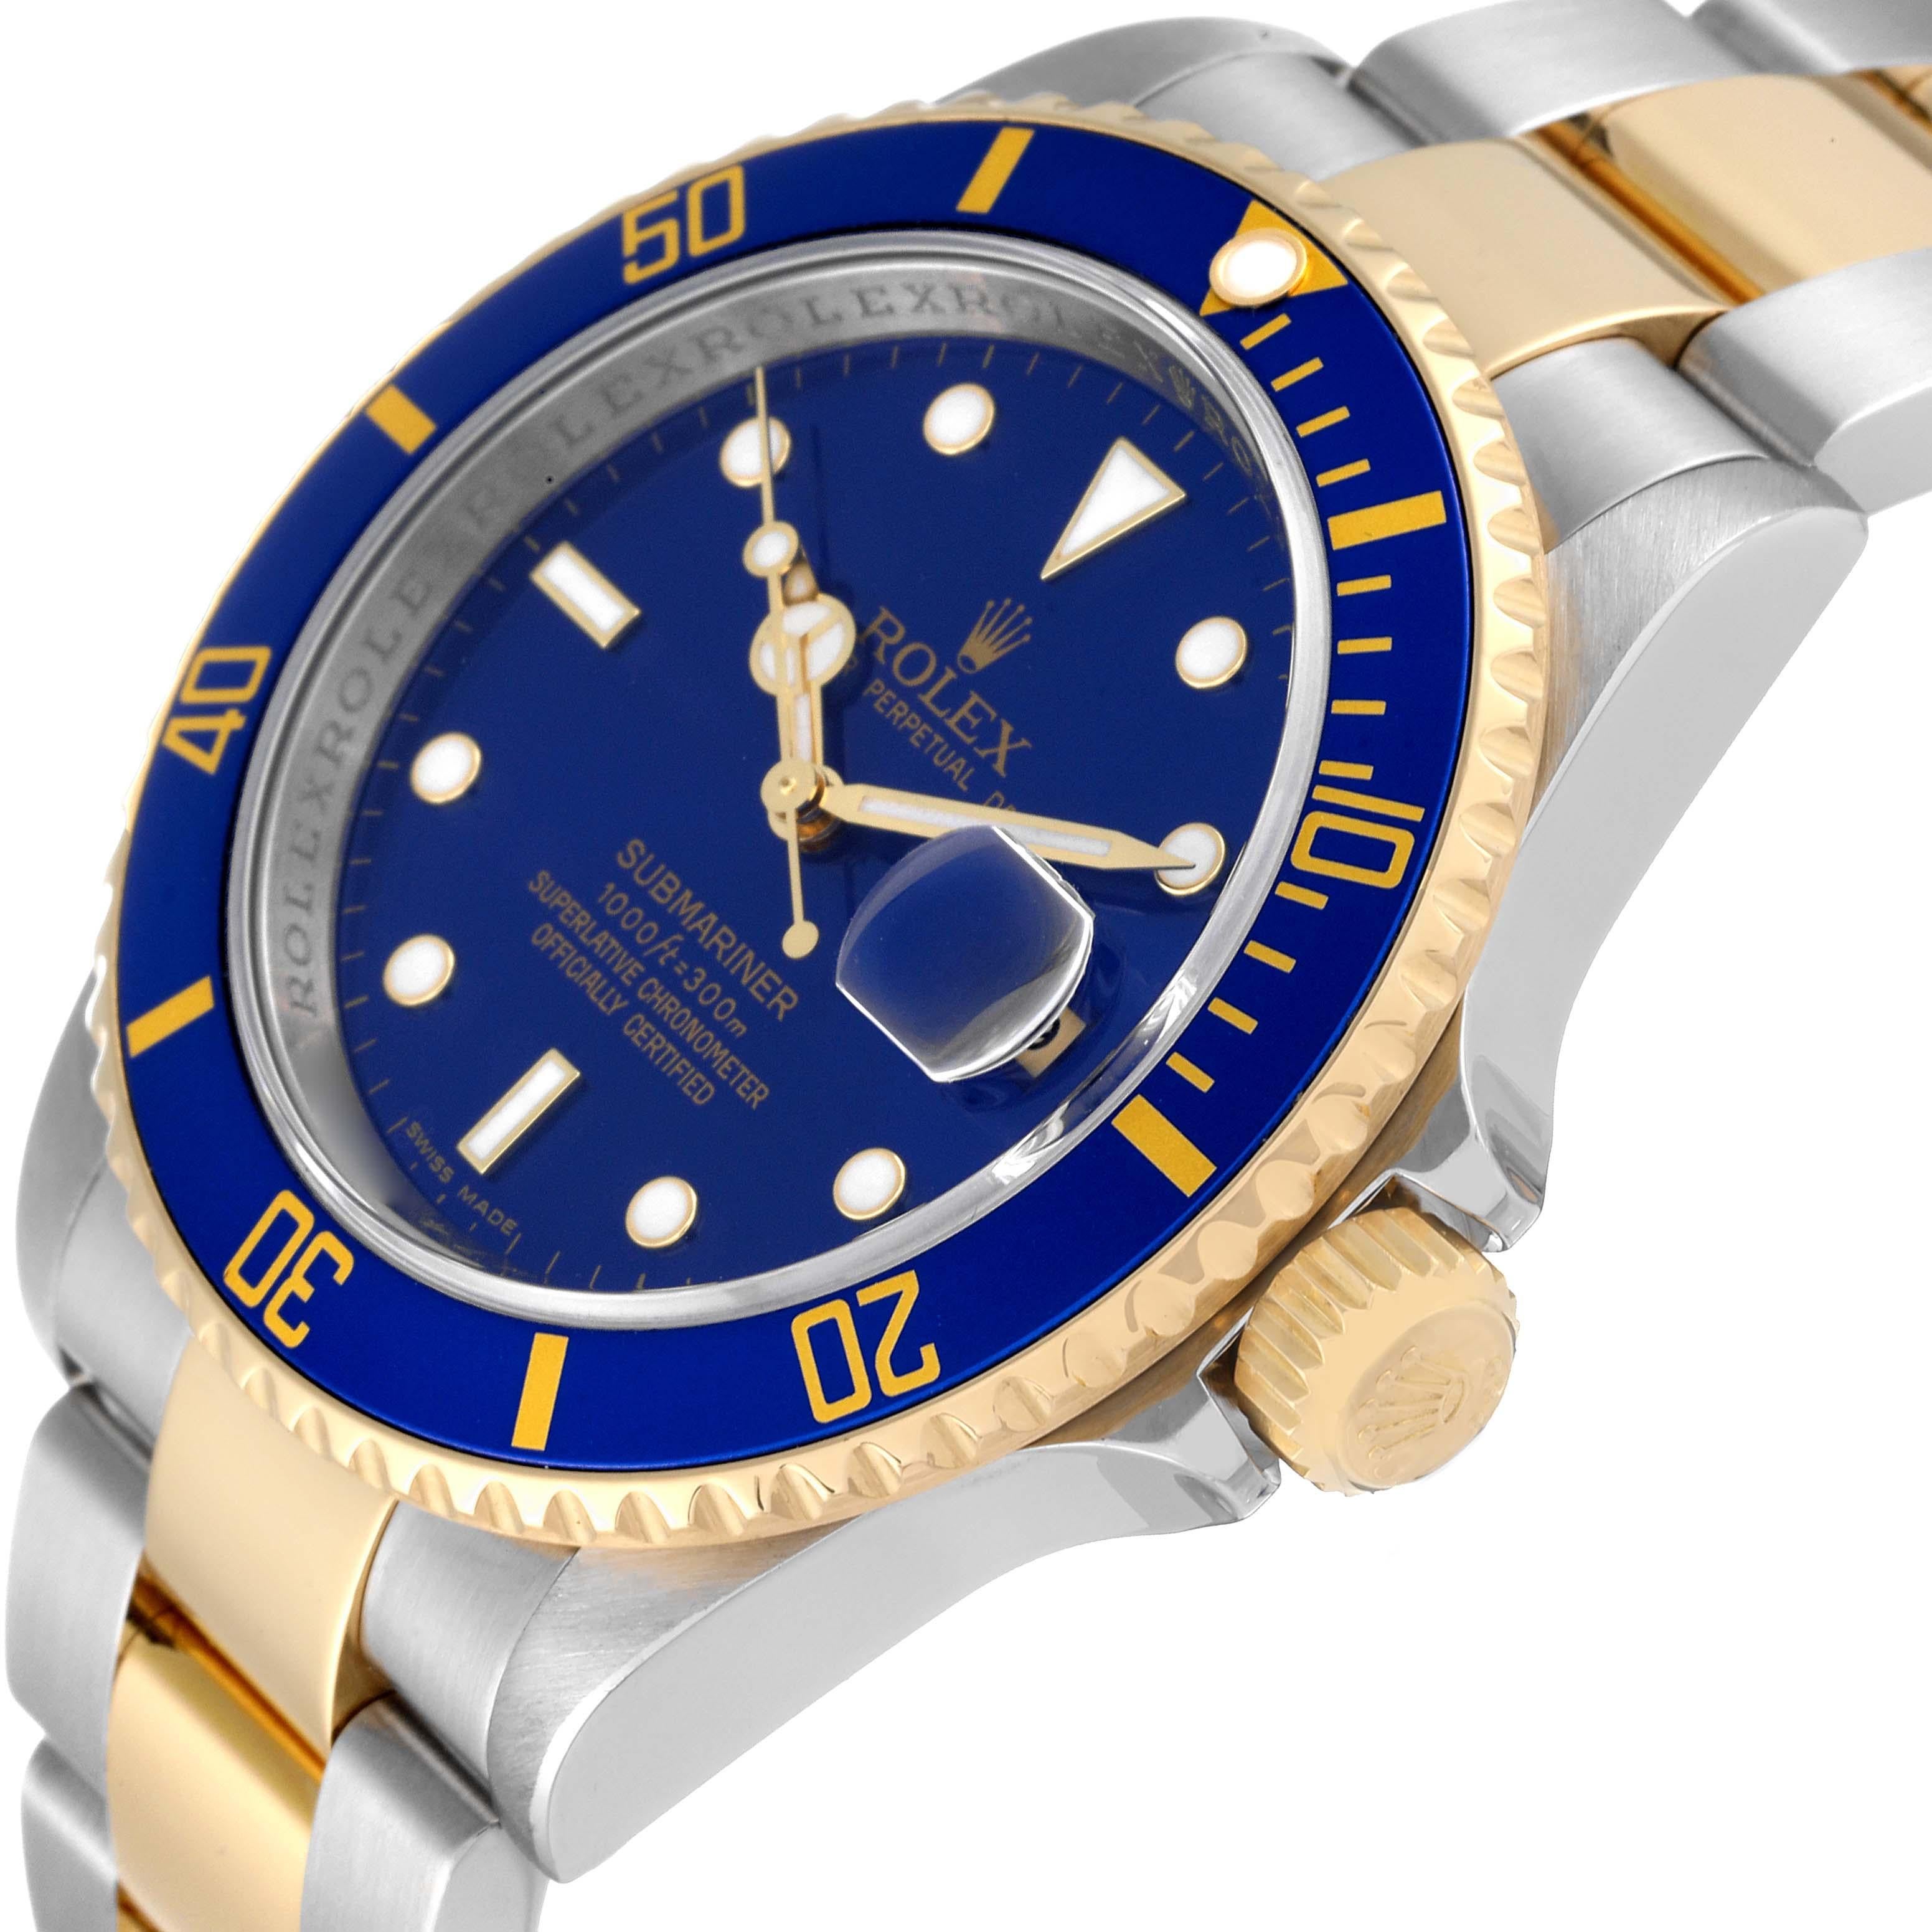 Rolex Submariner Steel Yellow Gold Blue Dial Mens Watch 116613 Box Card 1